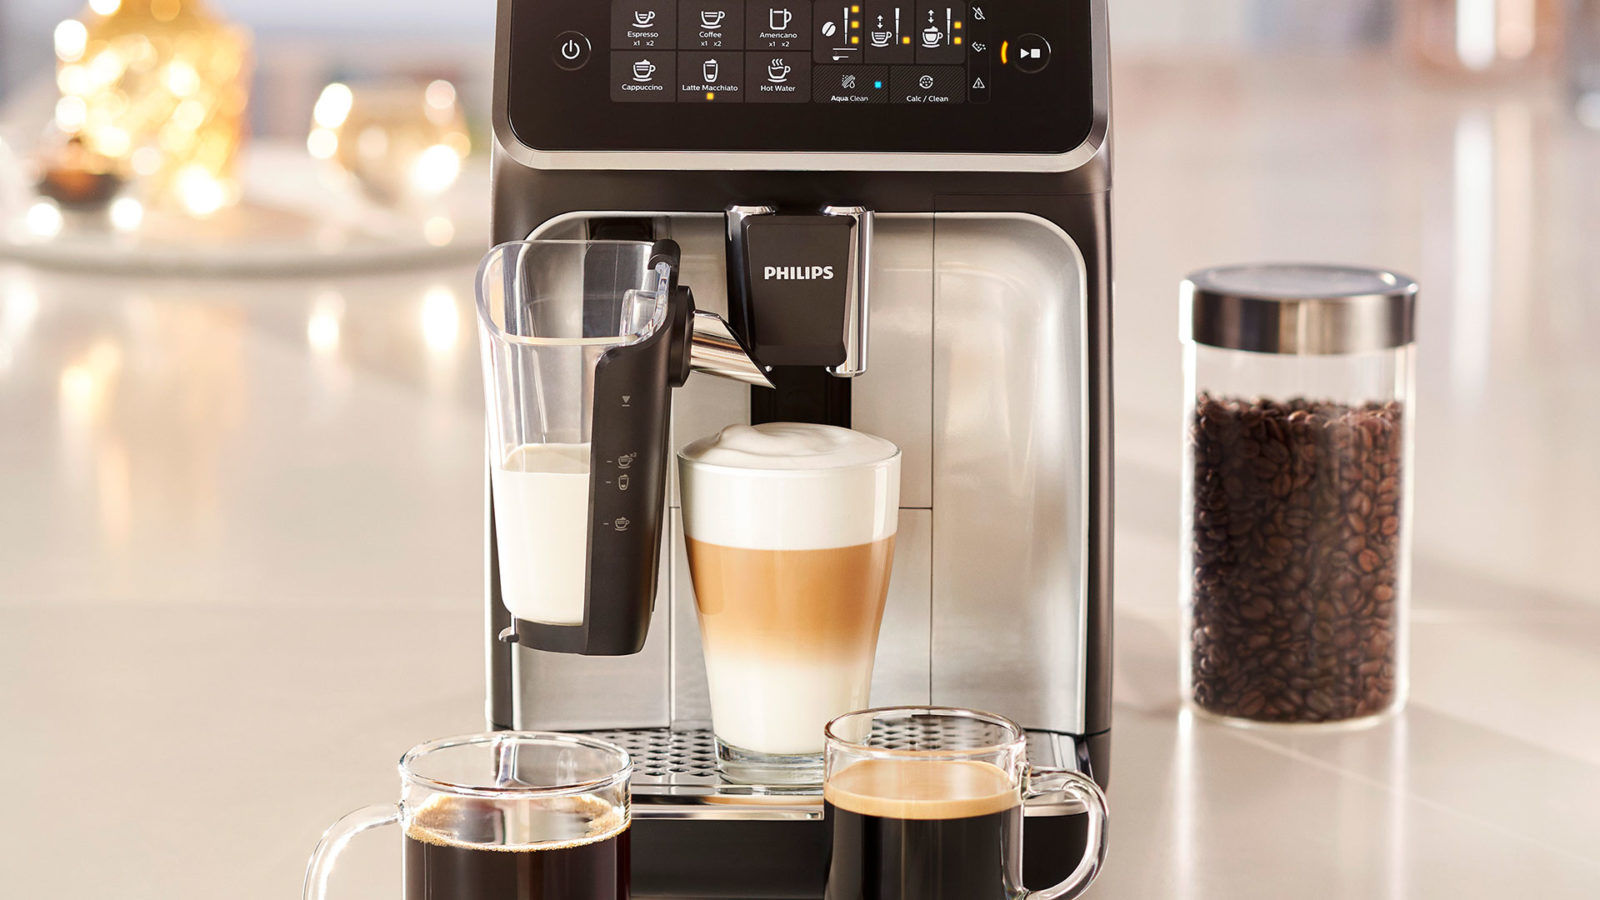 Review: The Philips 3200 LatteGo is a work of wonder when we're all working  from home